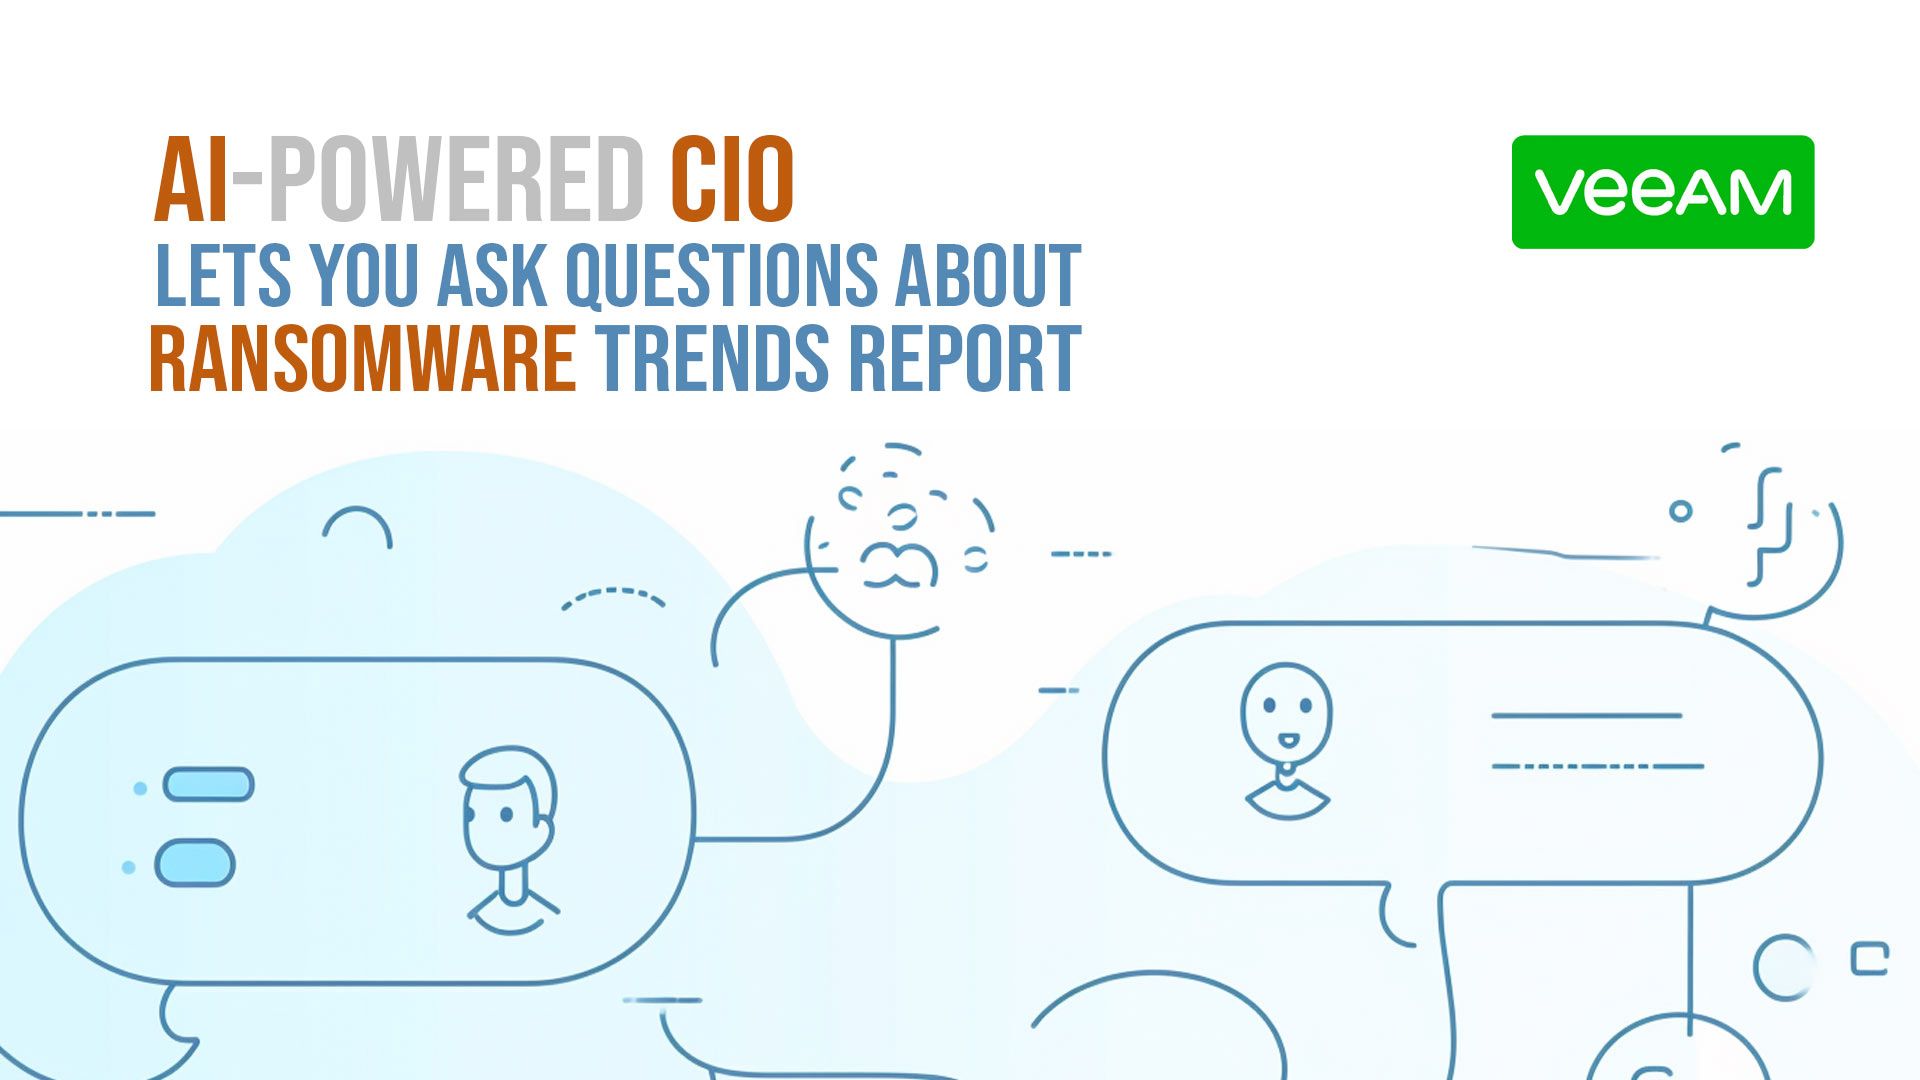 AI-powered CIO lets you ask questions of the Veeam Ransomware Trends Report 2023